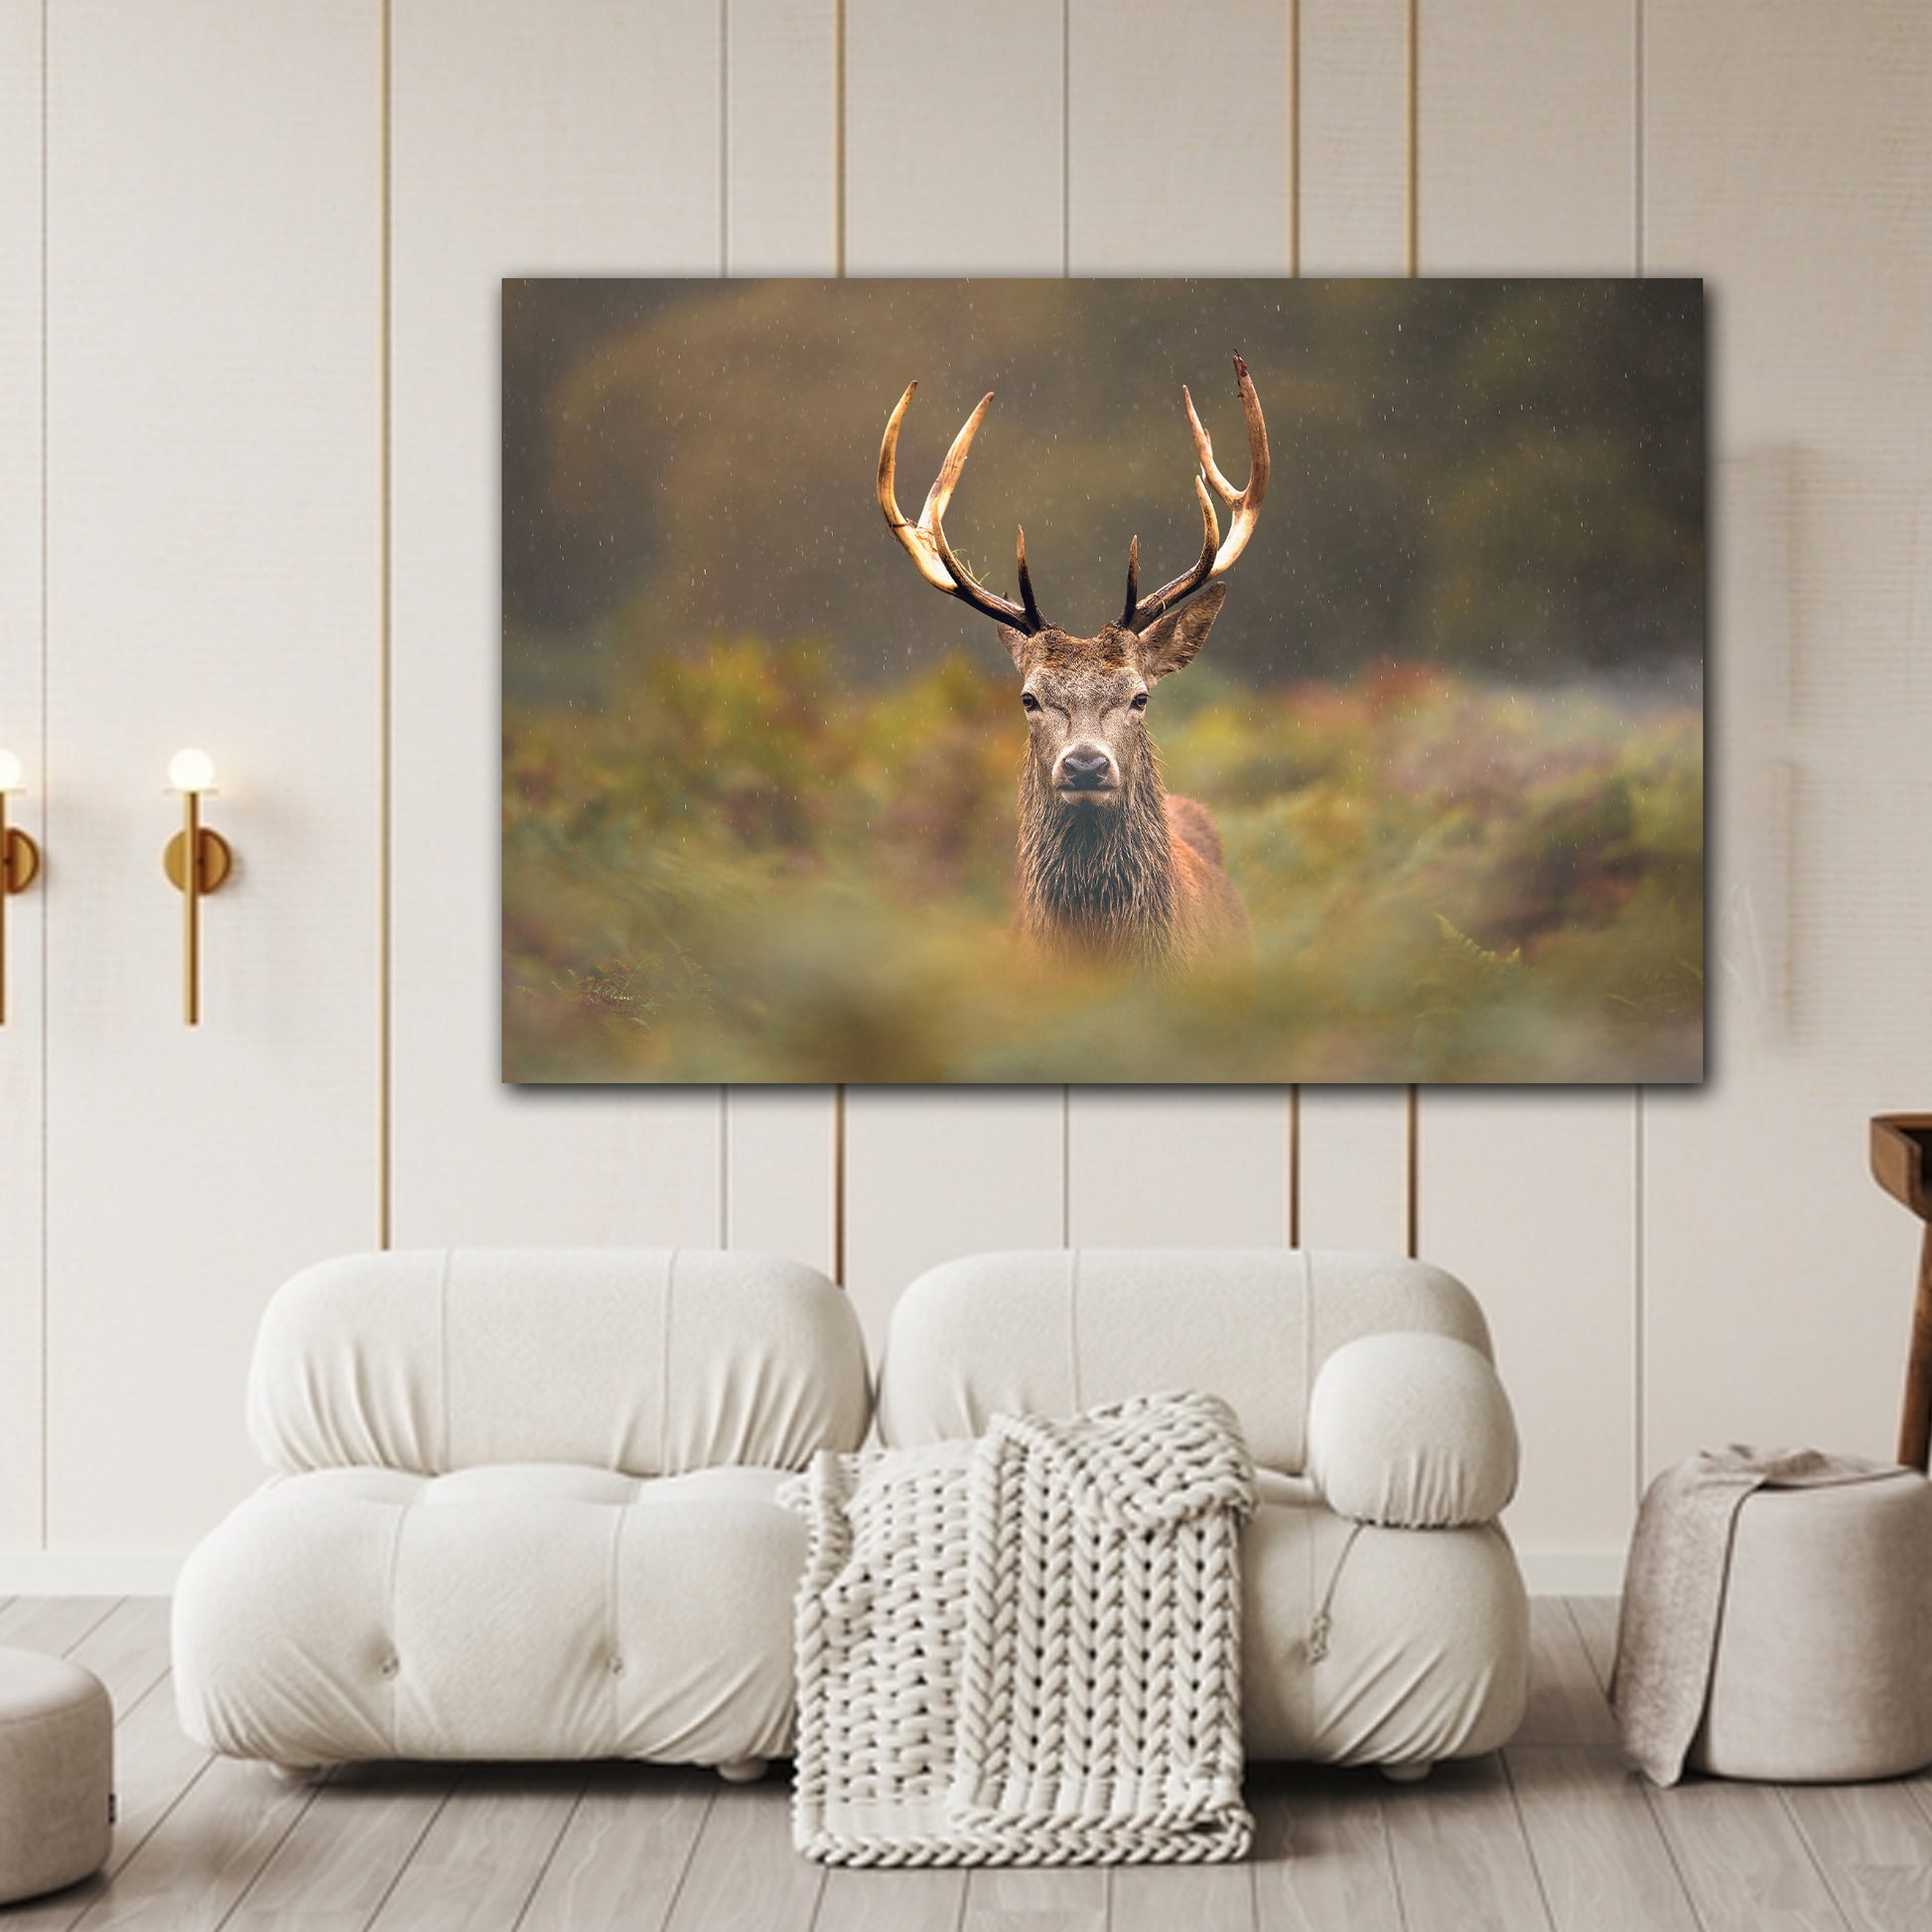 Deer with Antlers in Misty Forest Canvas Wall Art